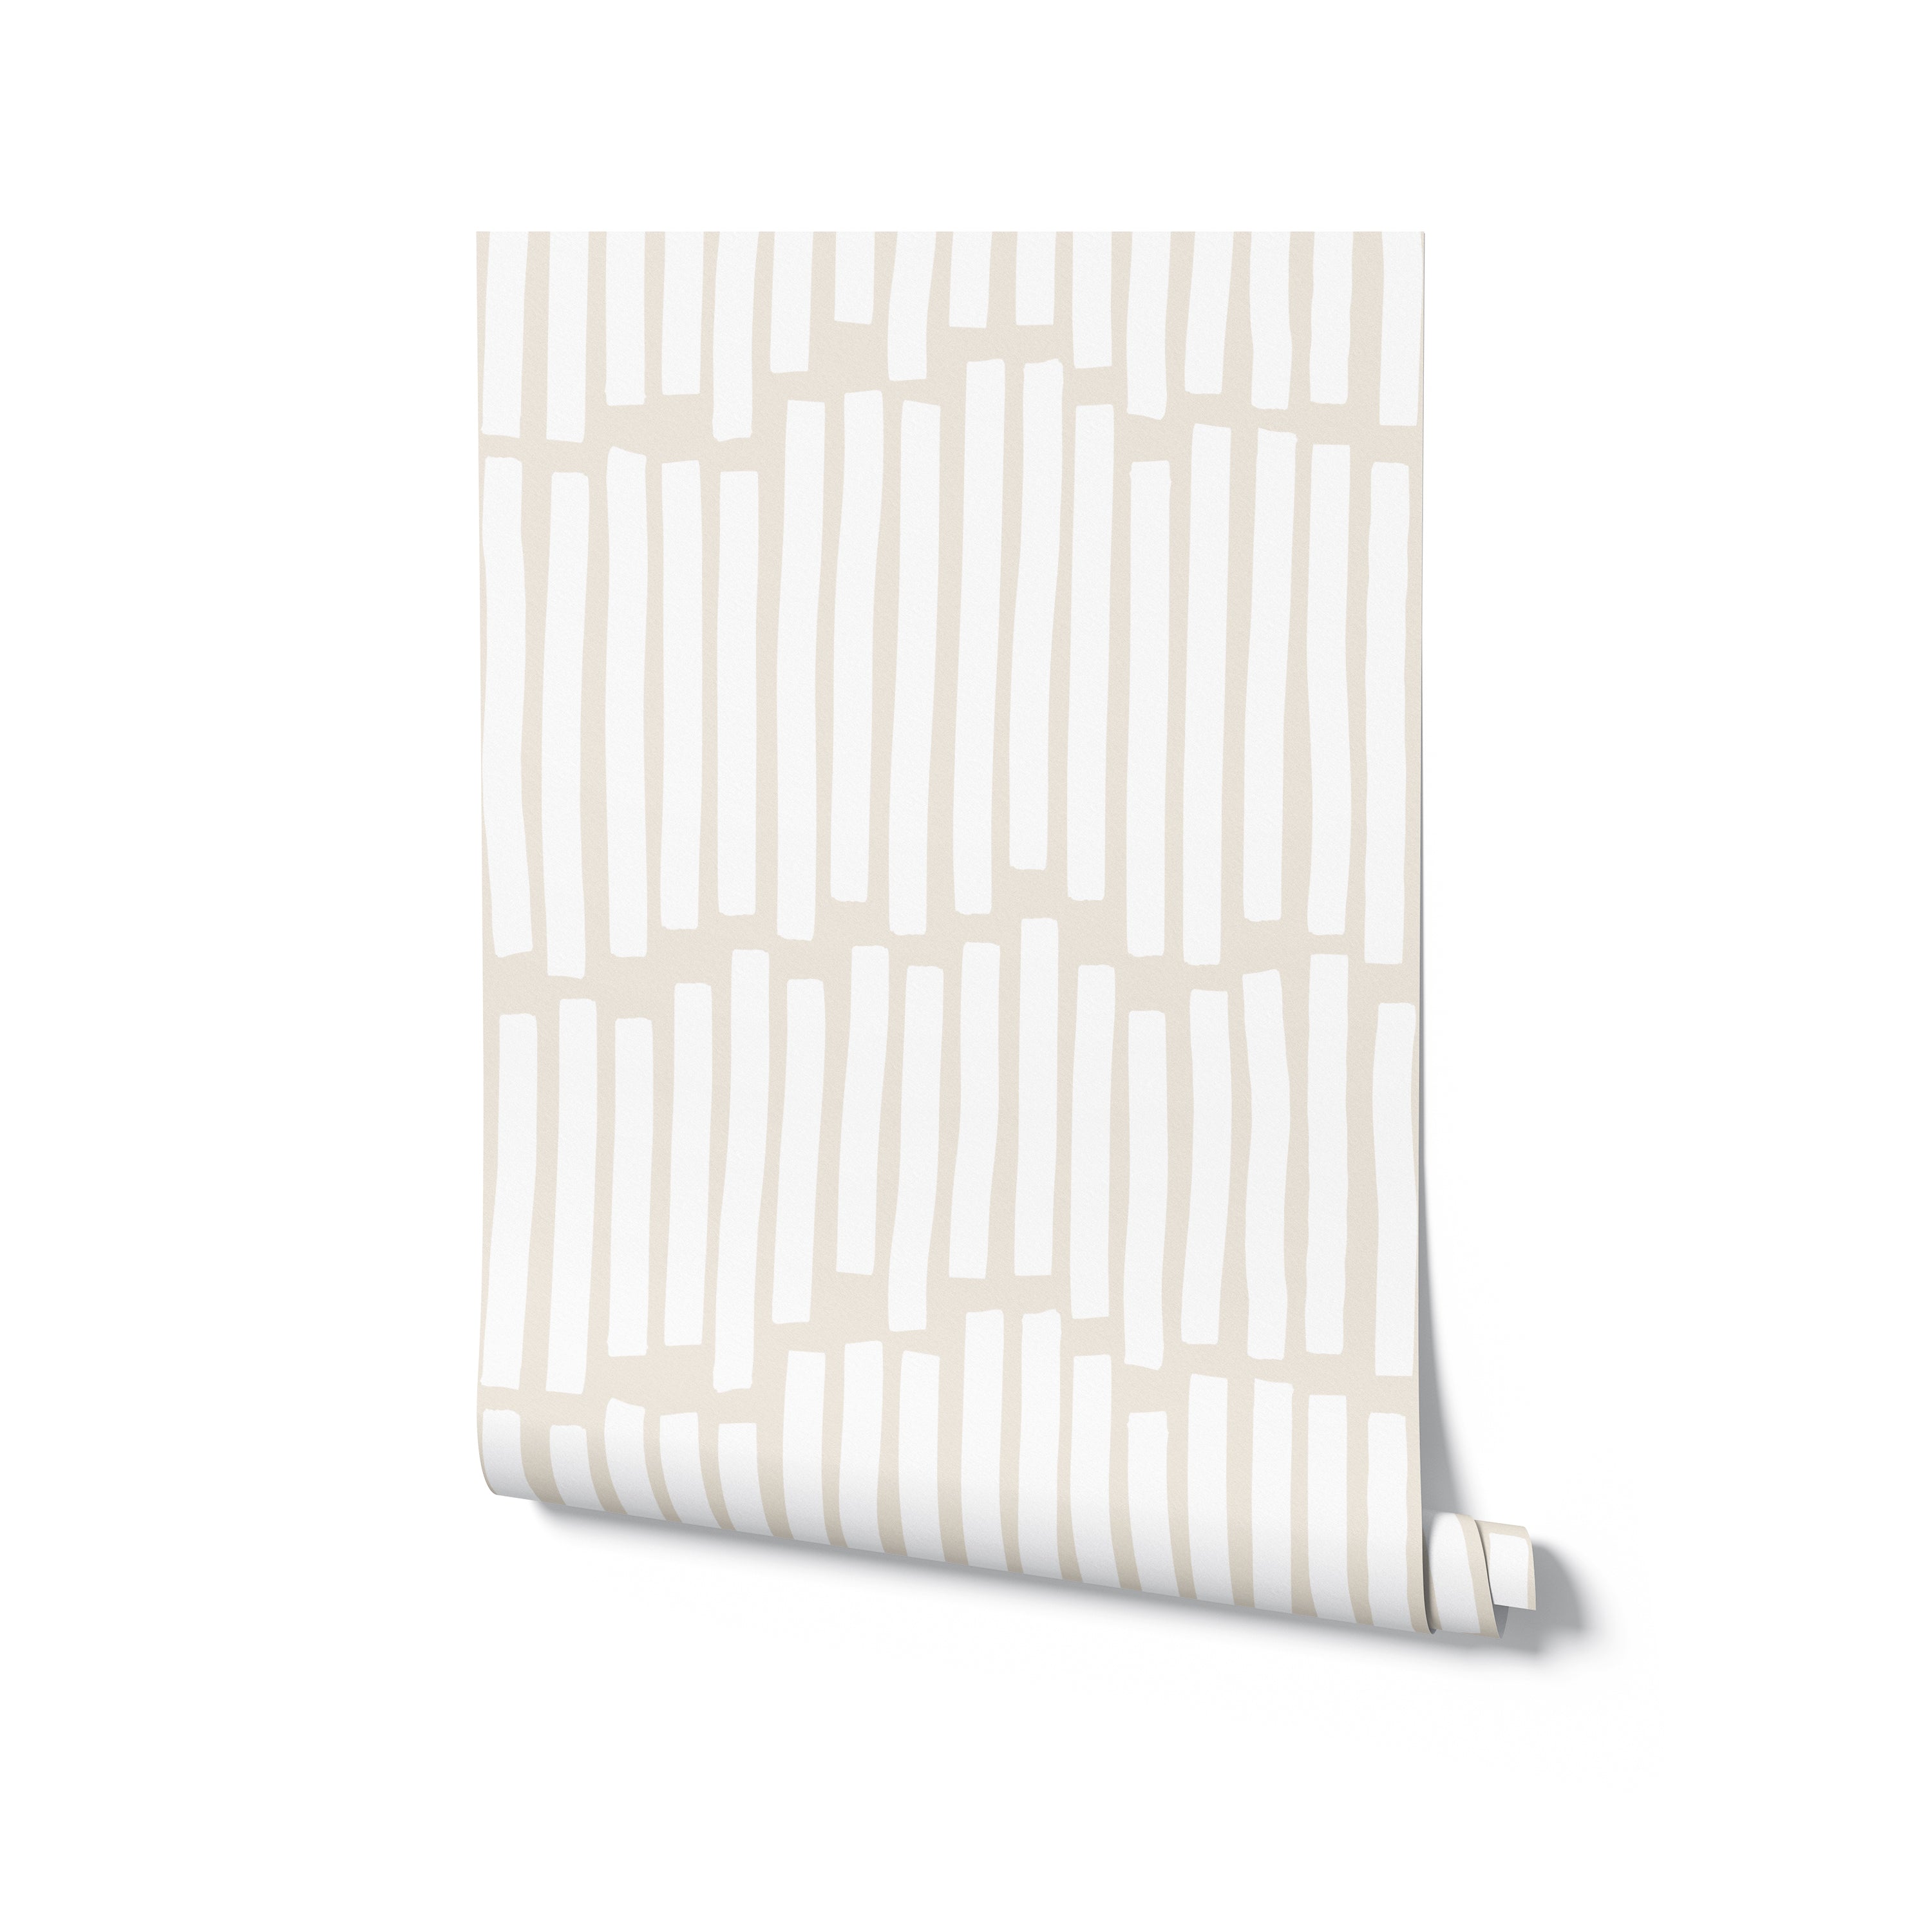 A roll of Boardwalk Wallpaper showing its simple yet elegant vertical stripe design in beige on a cream background. This wallpaper adds a touch of sophistication and is perfect for creating a serene environment in any room.